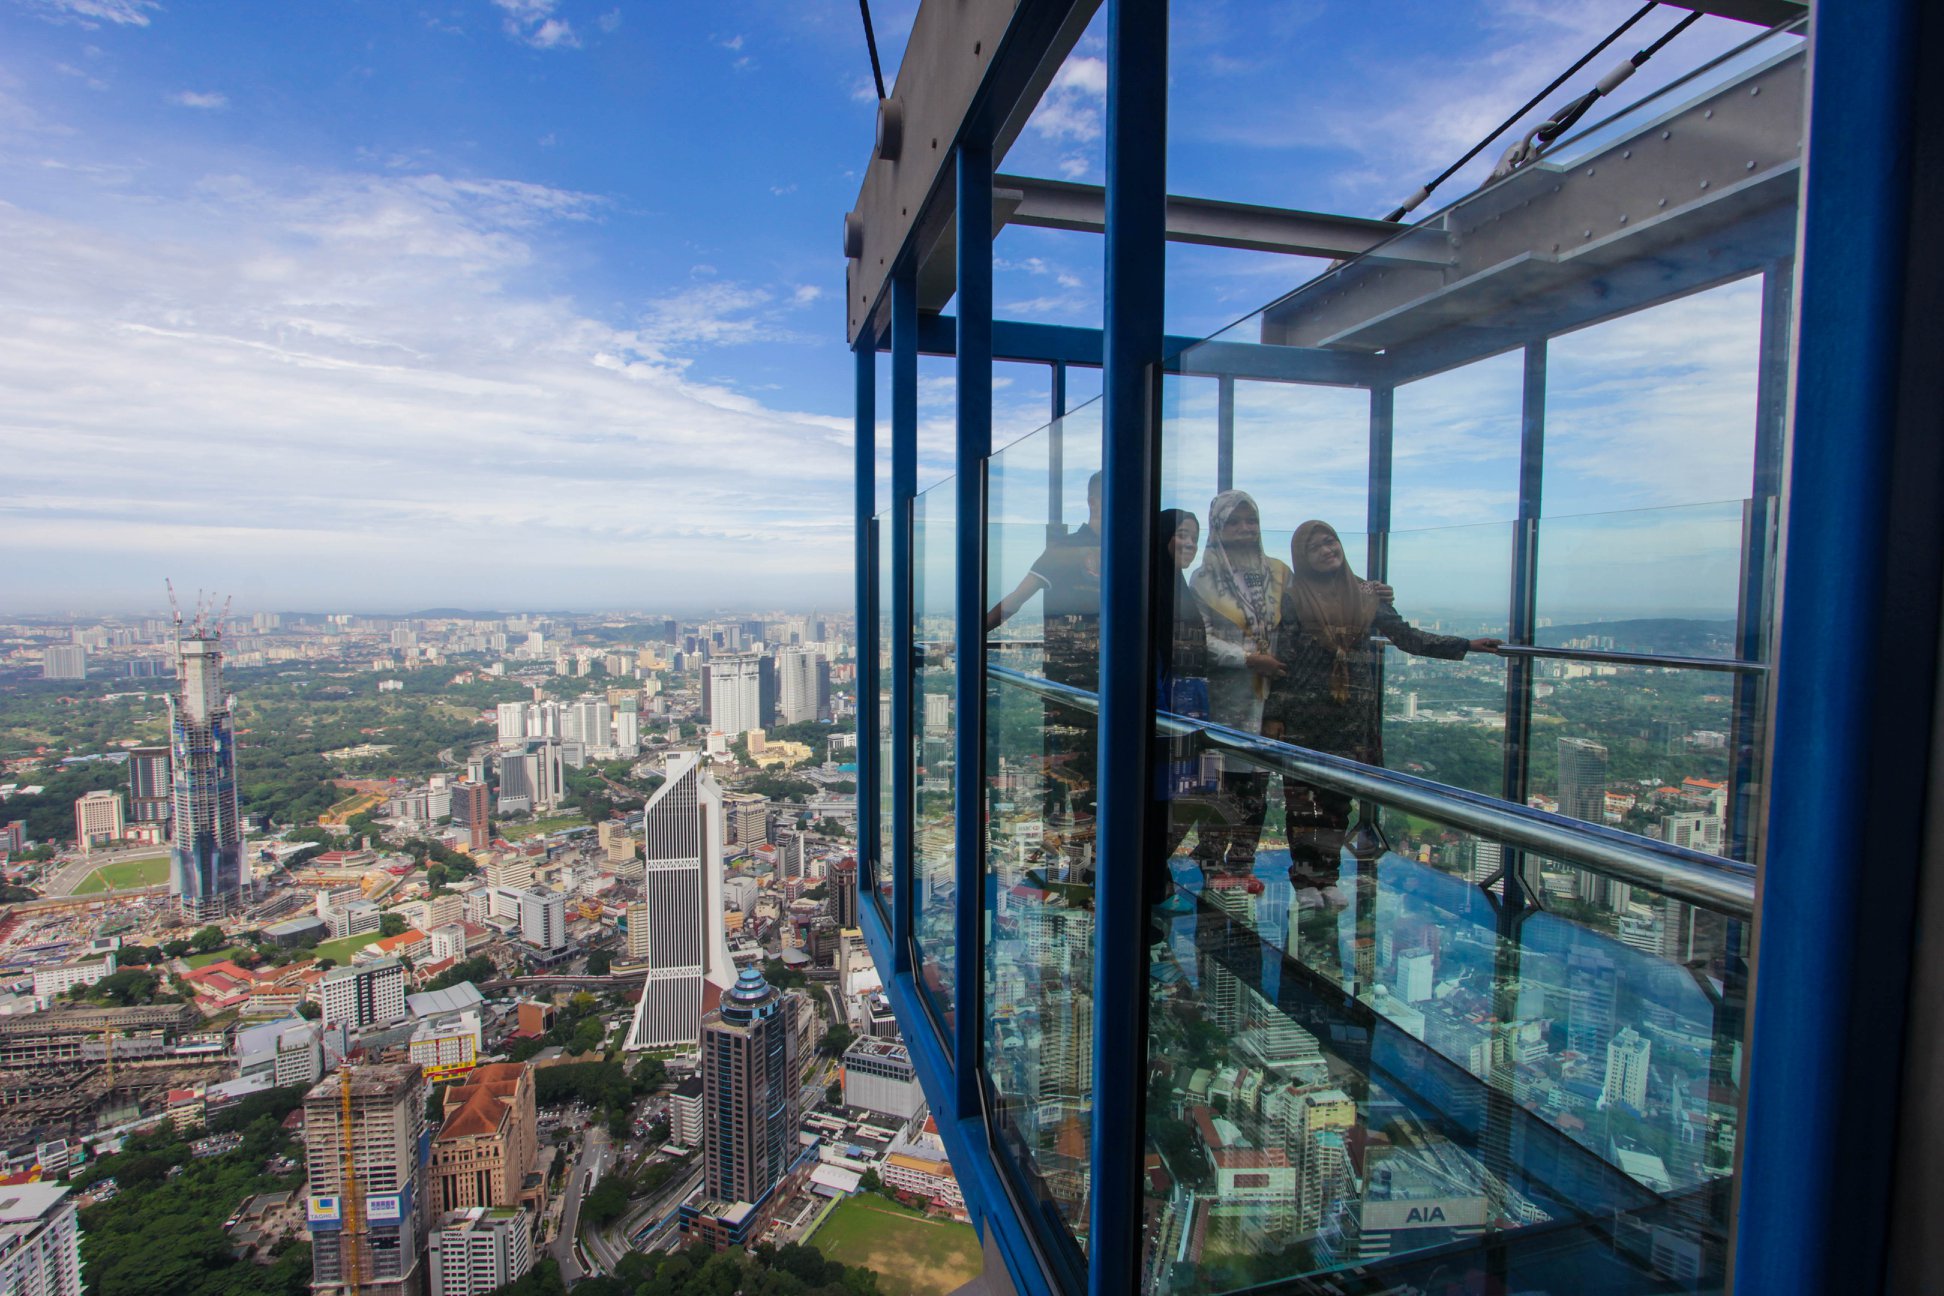 Visit KL Tower’s Observation Deck for free this July! - Sri Sutra Travel